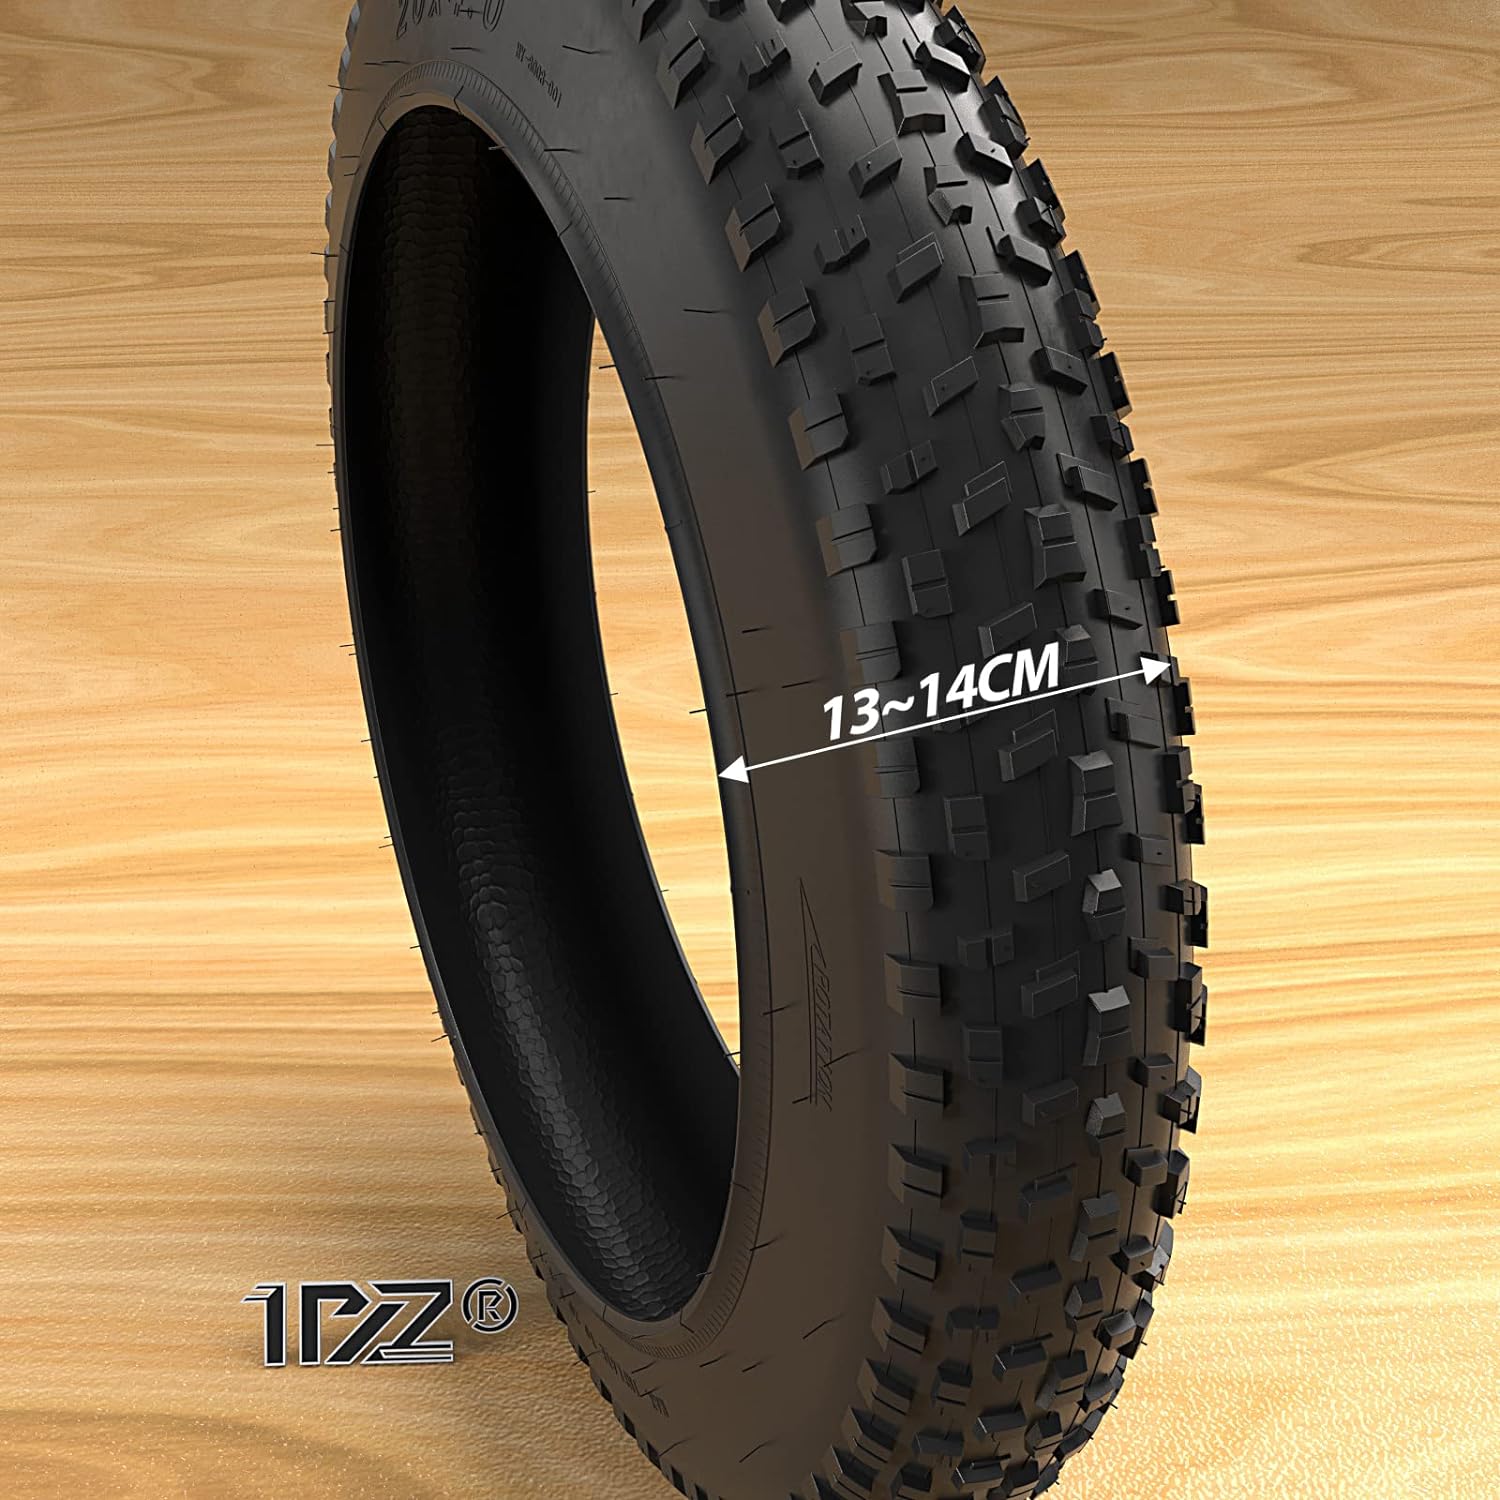 1PZ 20 x 4.0 Fat Tire, Folding Mountain Bike Tires, Replacement MTB Tires for On or Off Road Use